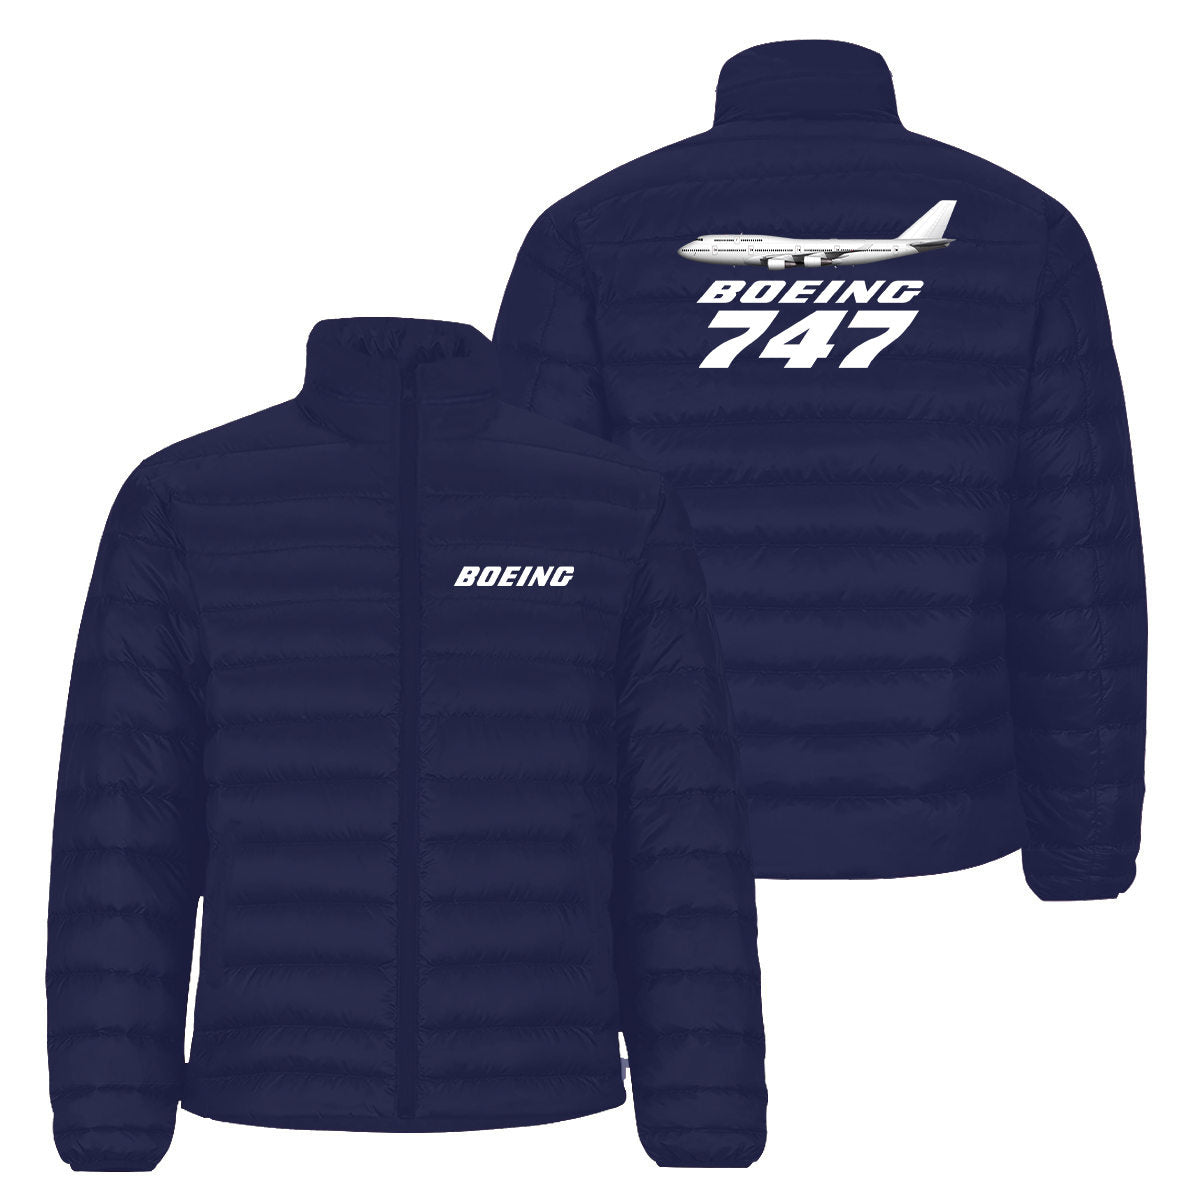 The Boeing 747 Designed Padded Jackets